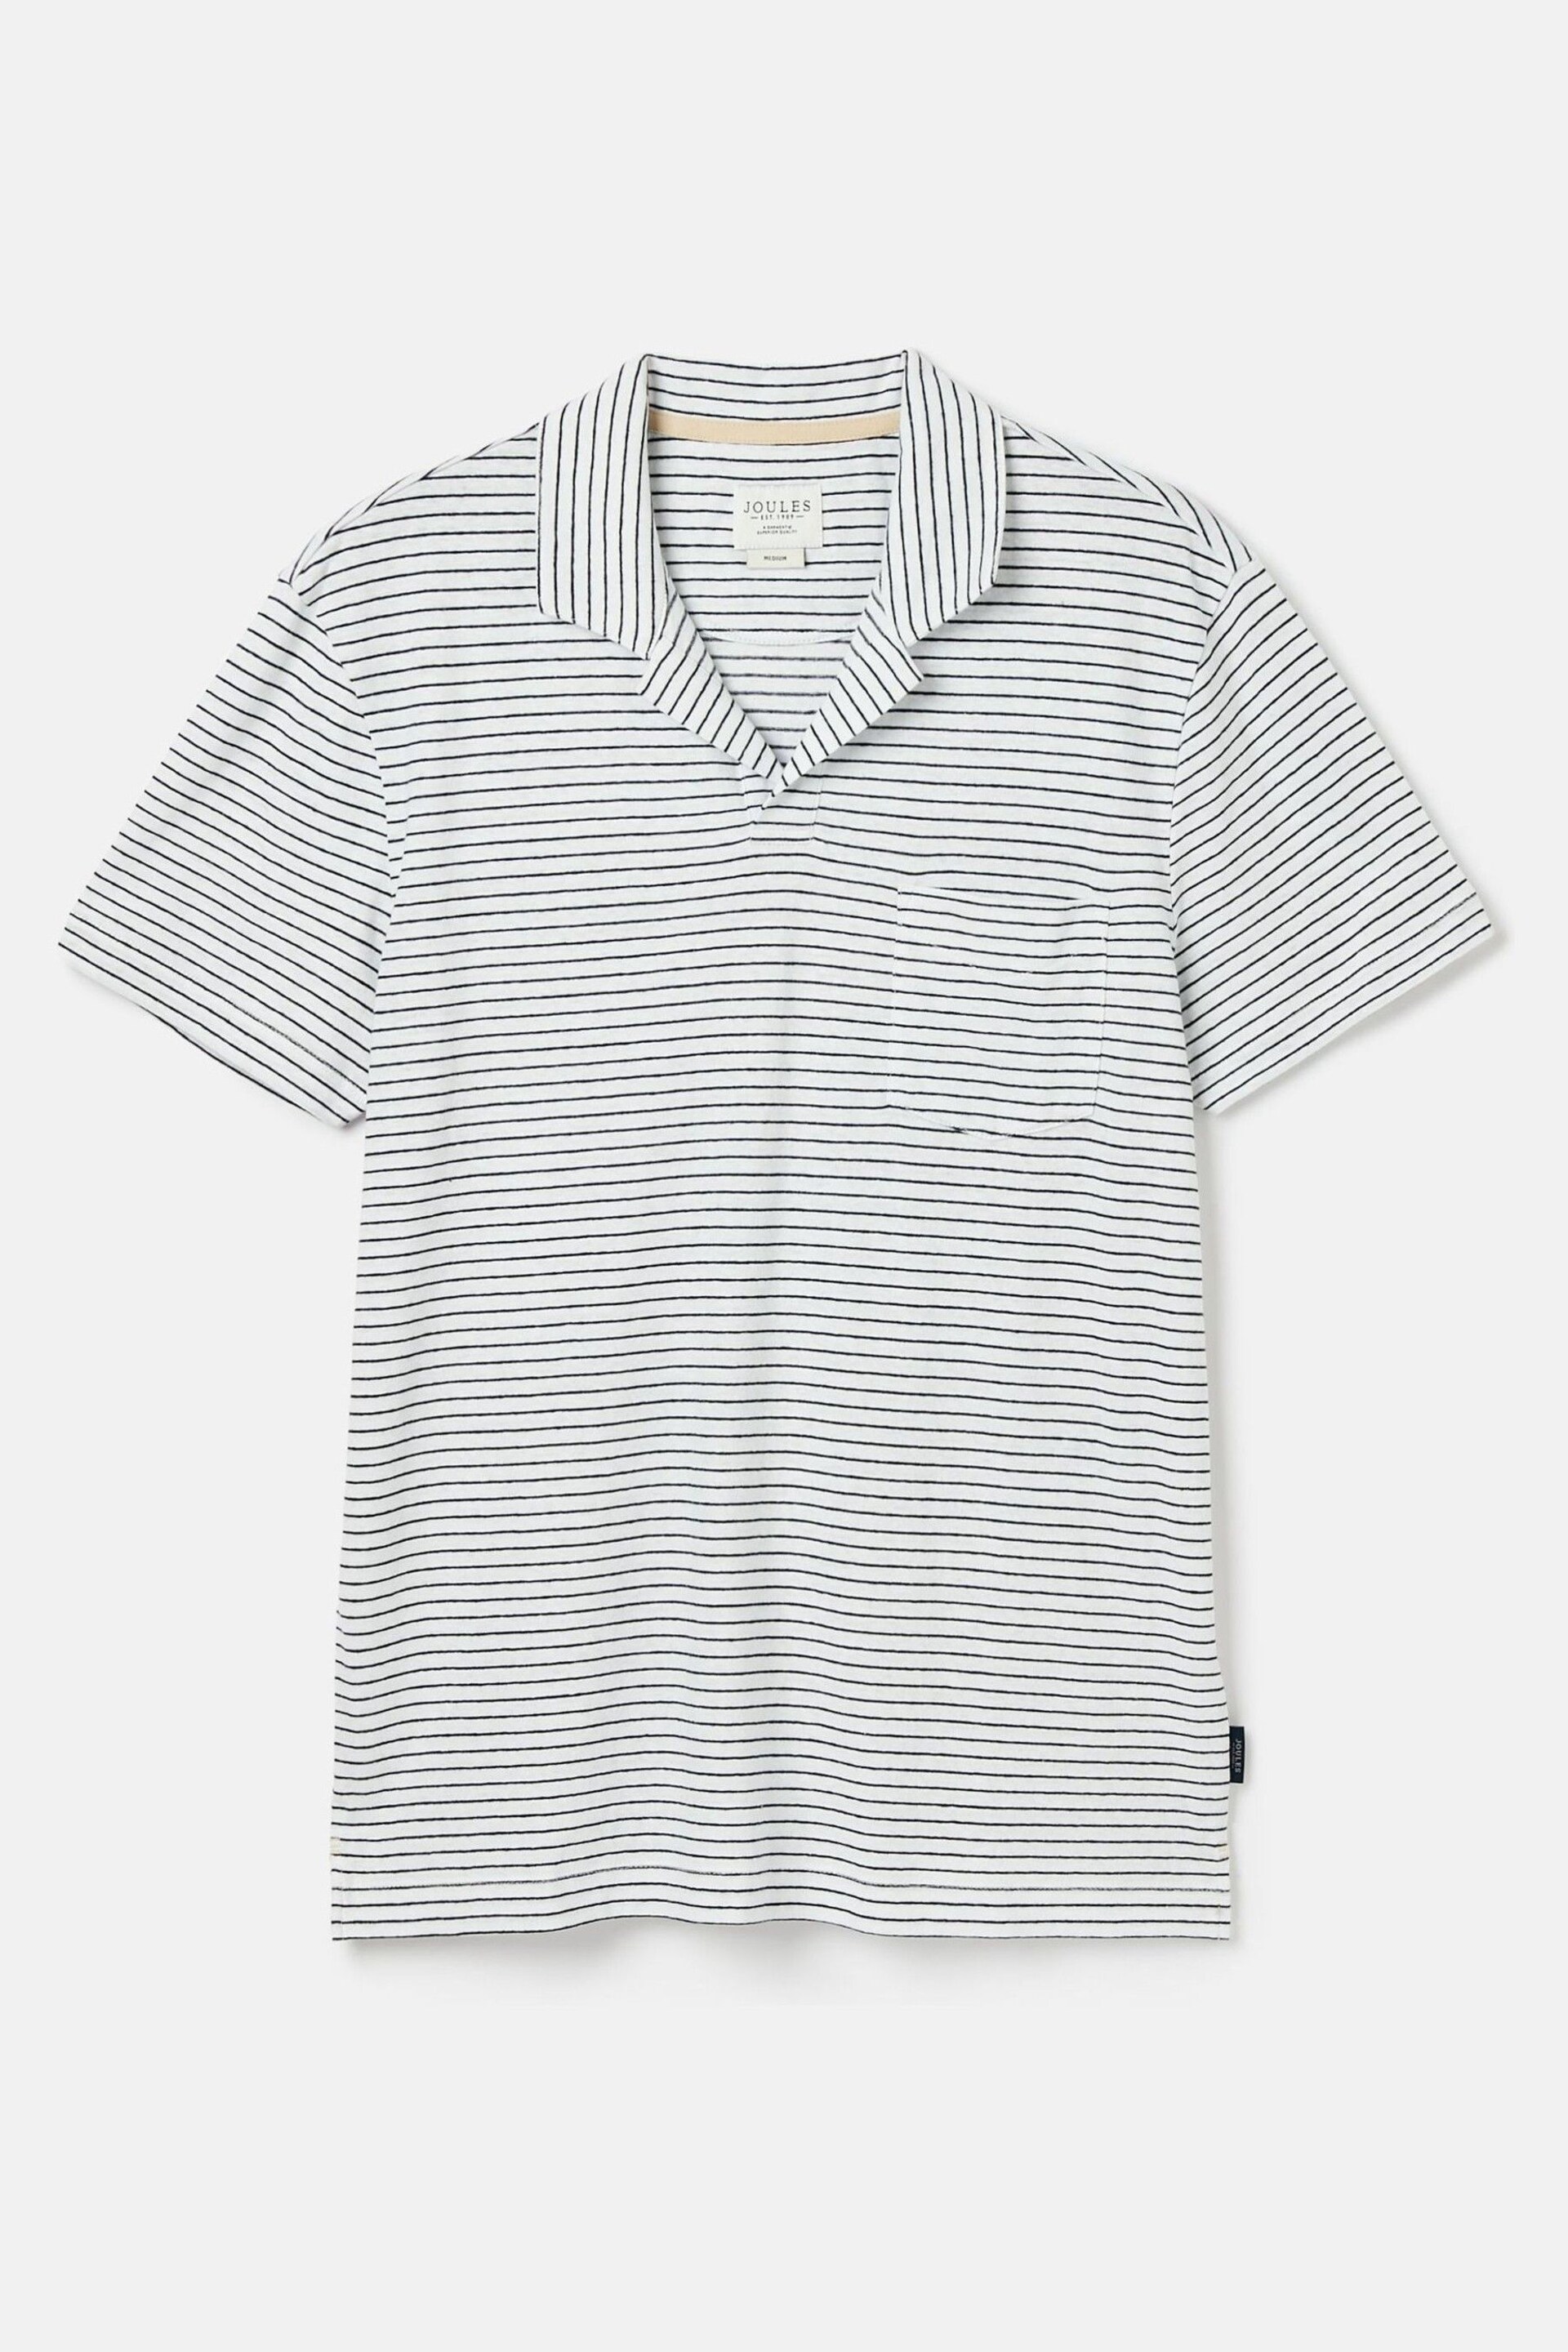 Joules Linen Blend White Striped Polo Shirt - Image 7 of 7